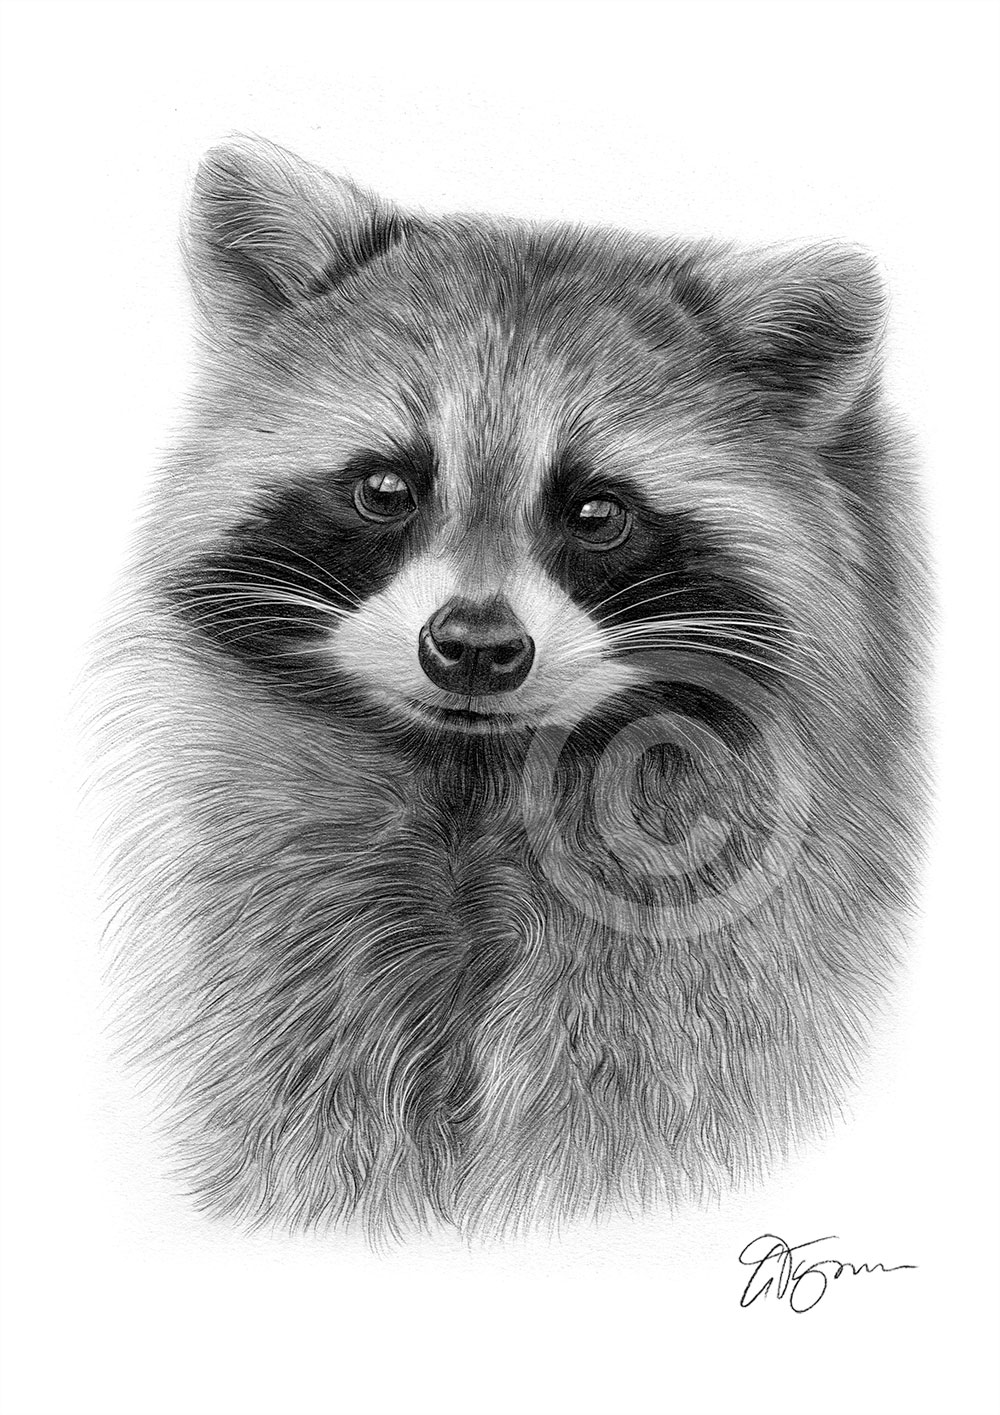 Pencil drawing of a young raccoon by artist Gary Tymon